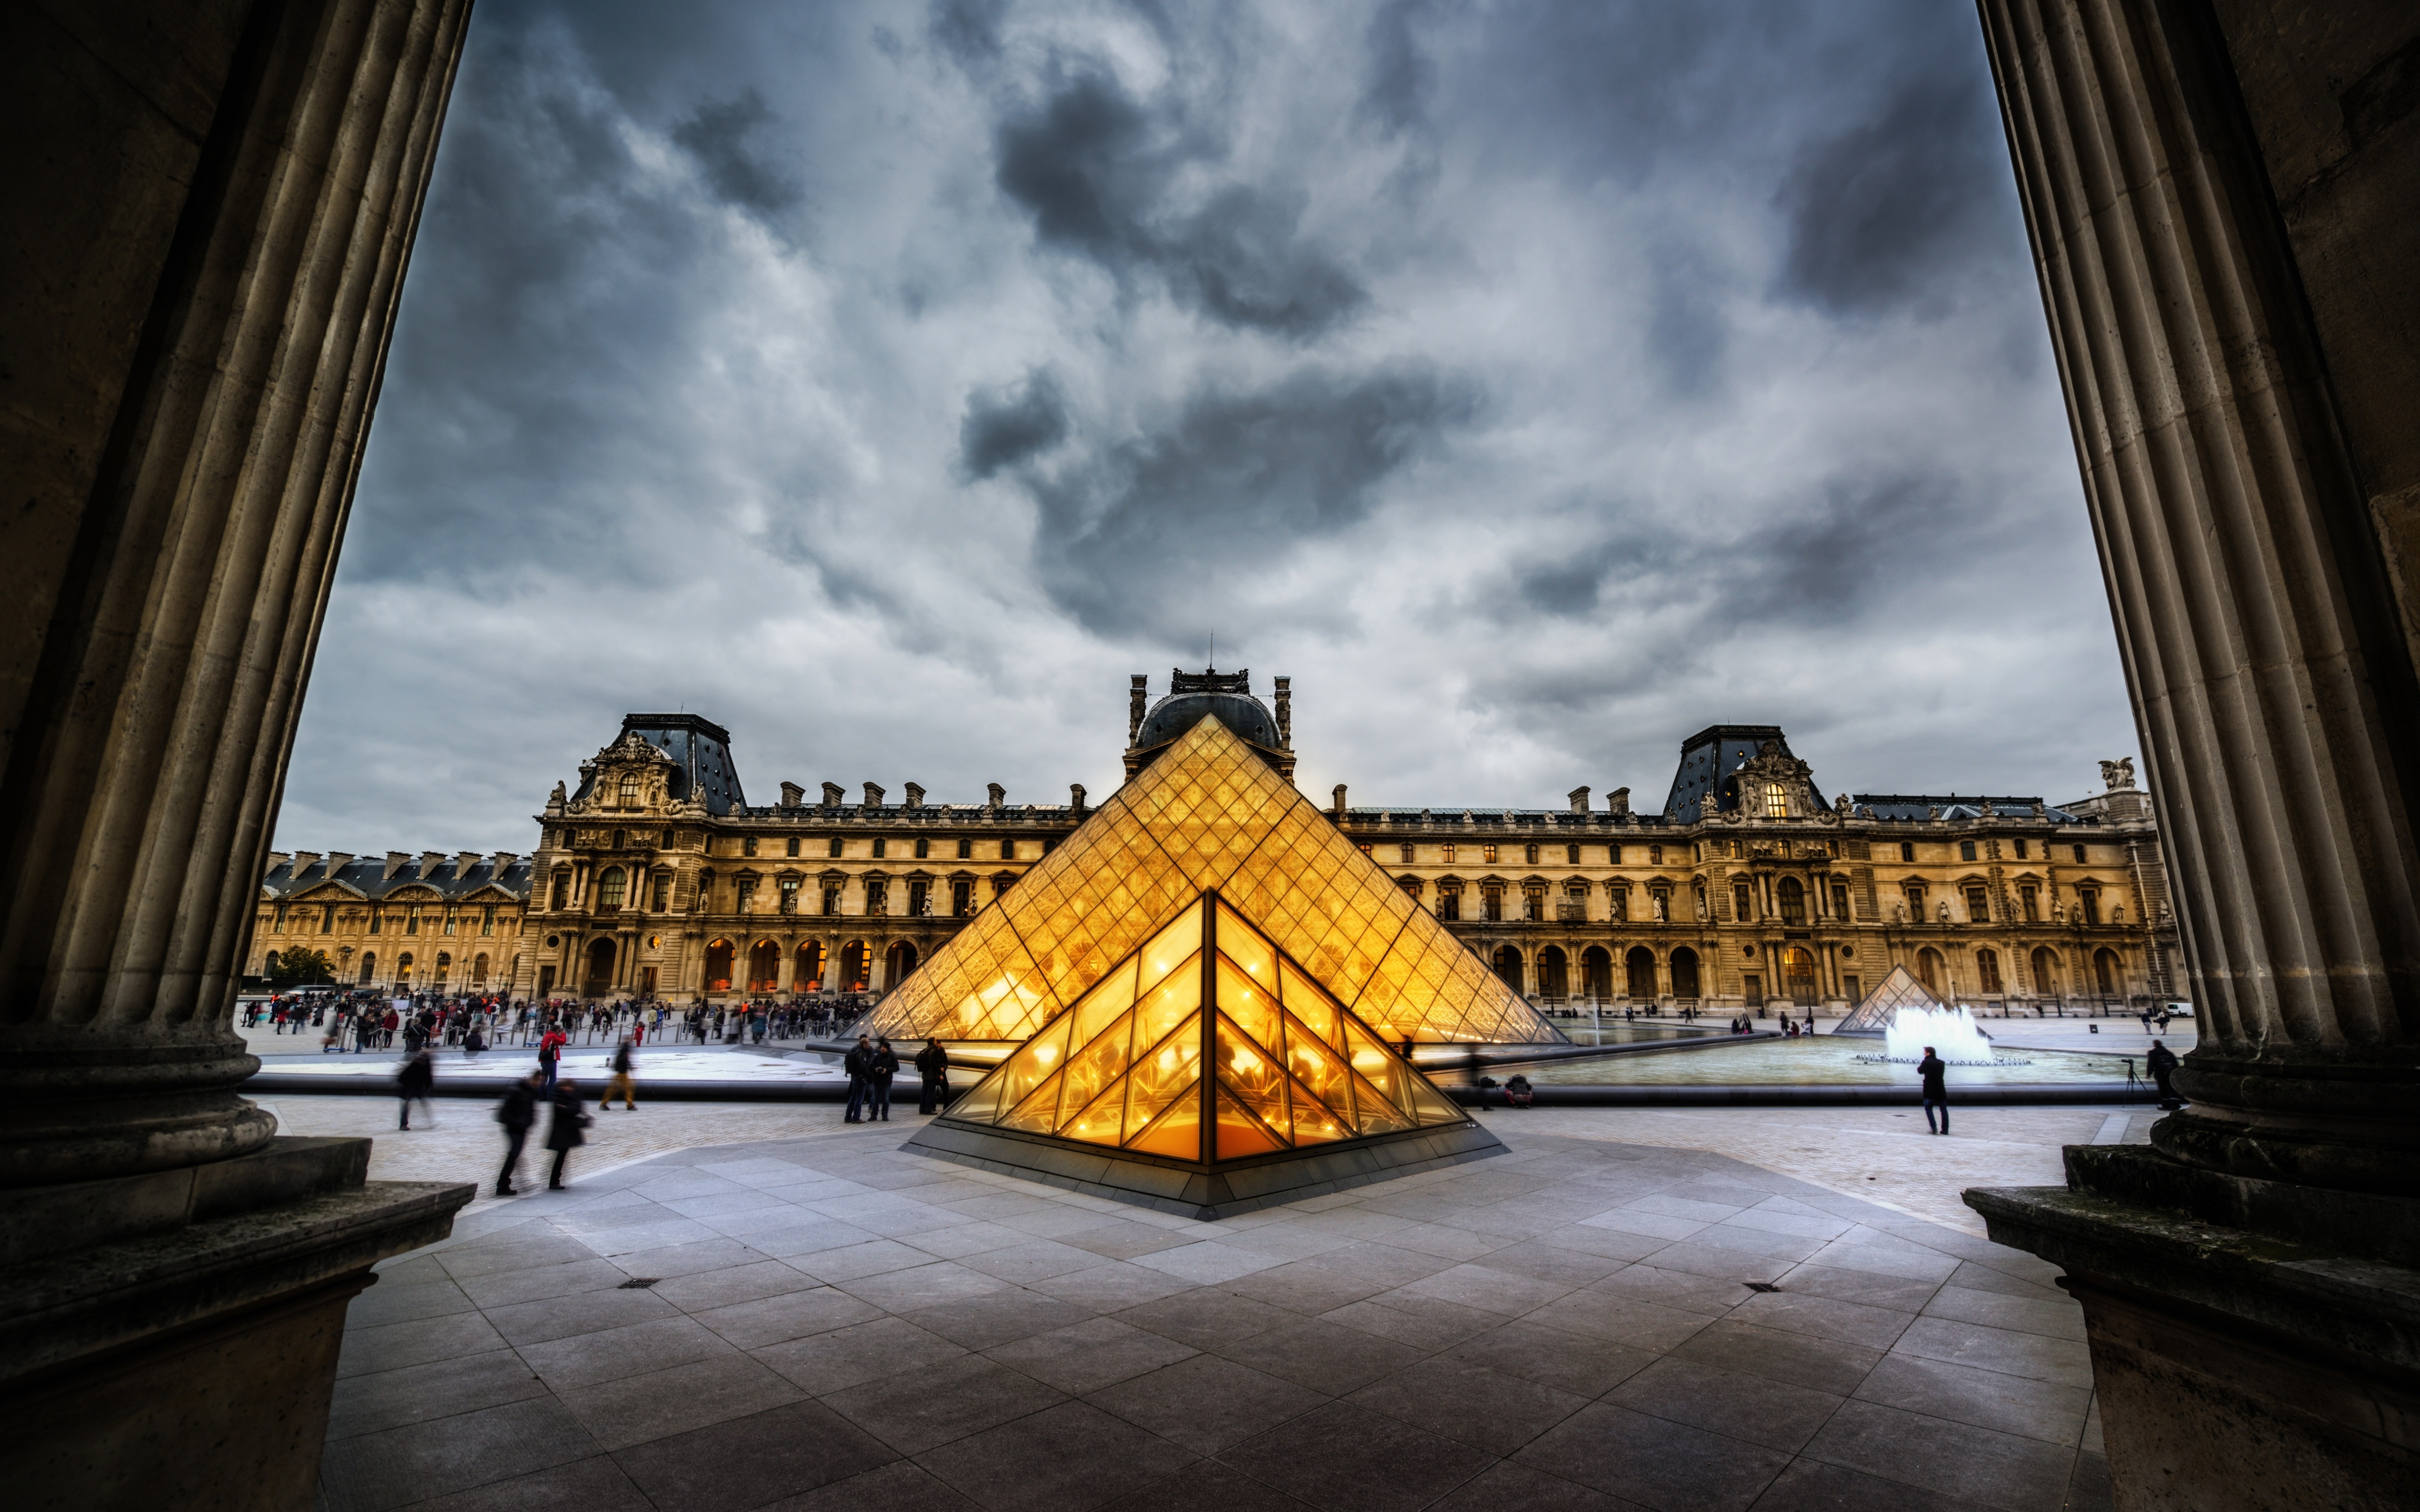 The Louvre HD Wallpaper Background Image